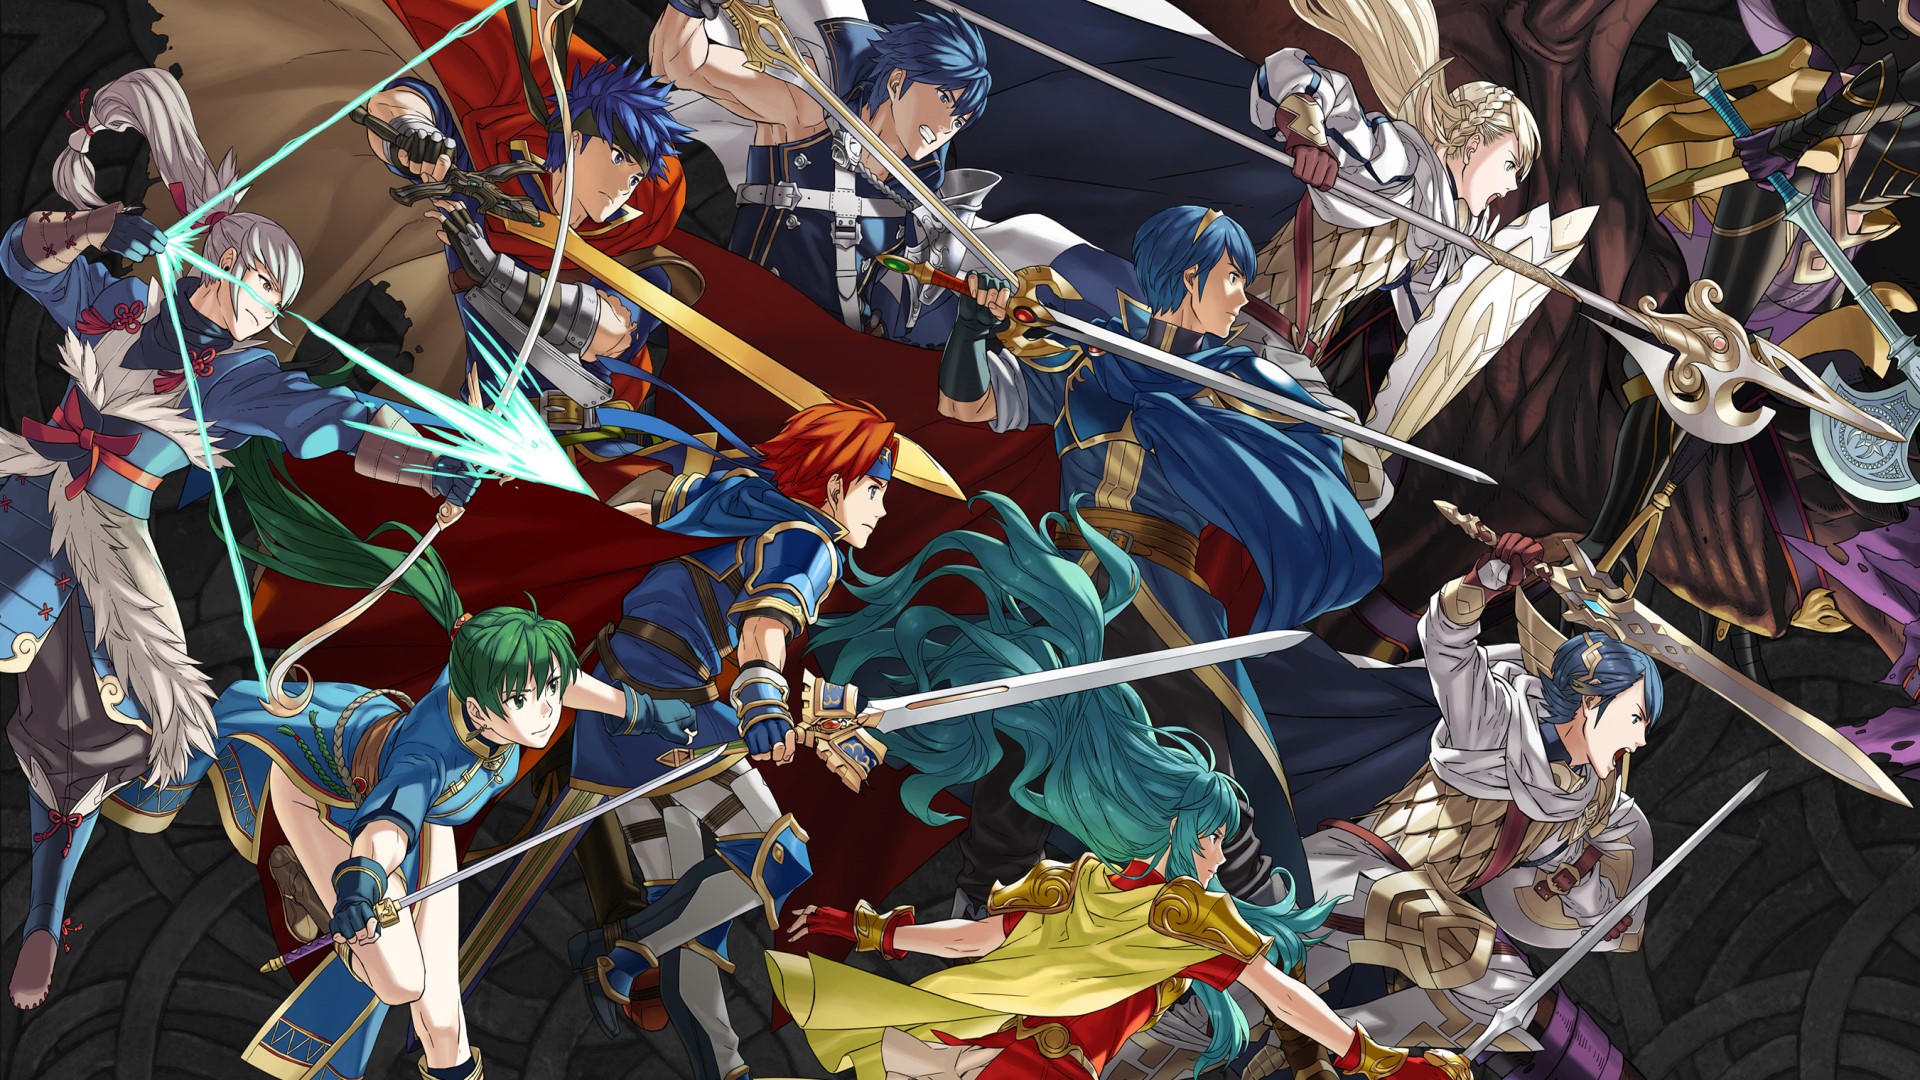 Best mobile strategy games: Fire Emblem Heroes. Image shows a huge group of Fire Emblem characters leaping through the air with their weapons ready.